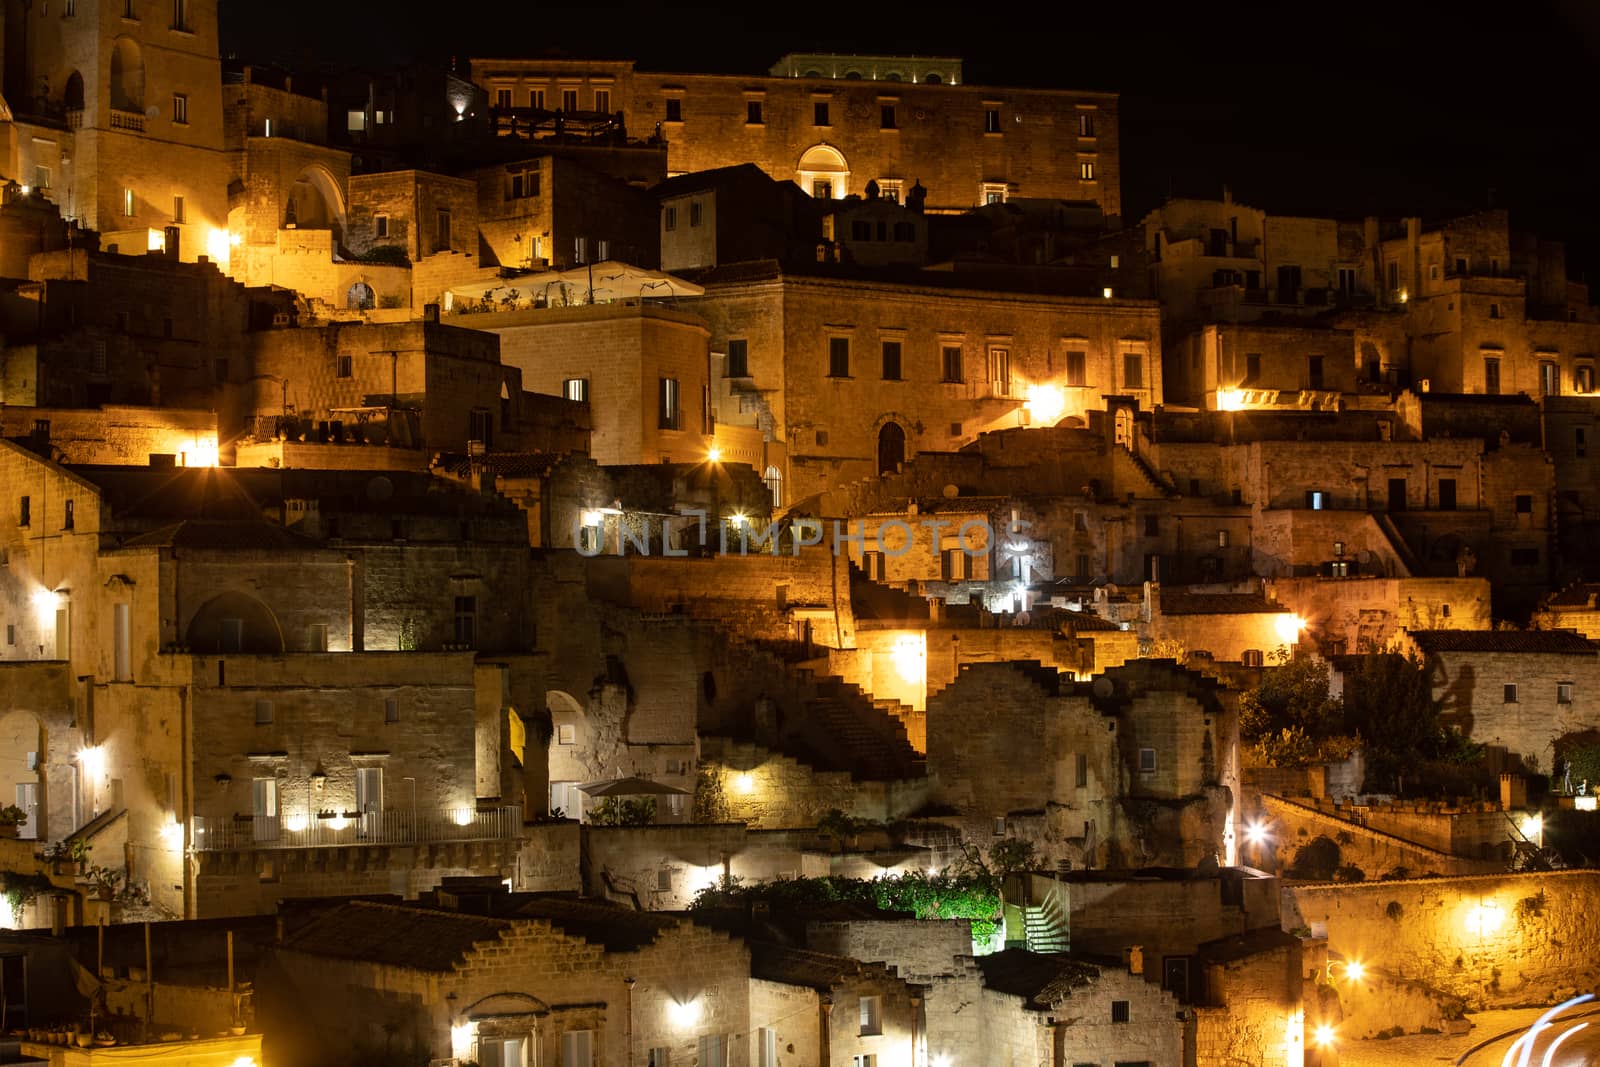 Amazing lighted buildings in ancient Sassi district by night in Matera,  Basilicata. Italy by wjarek